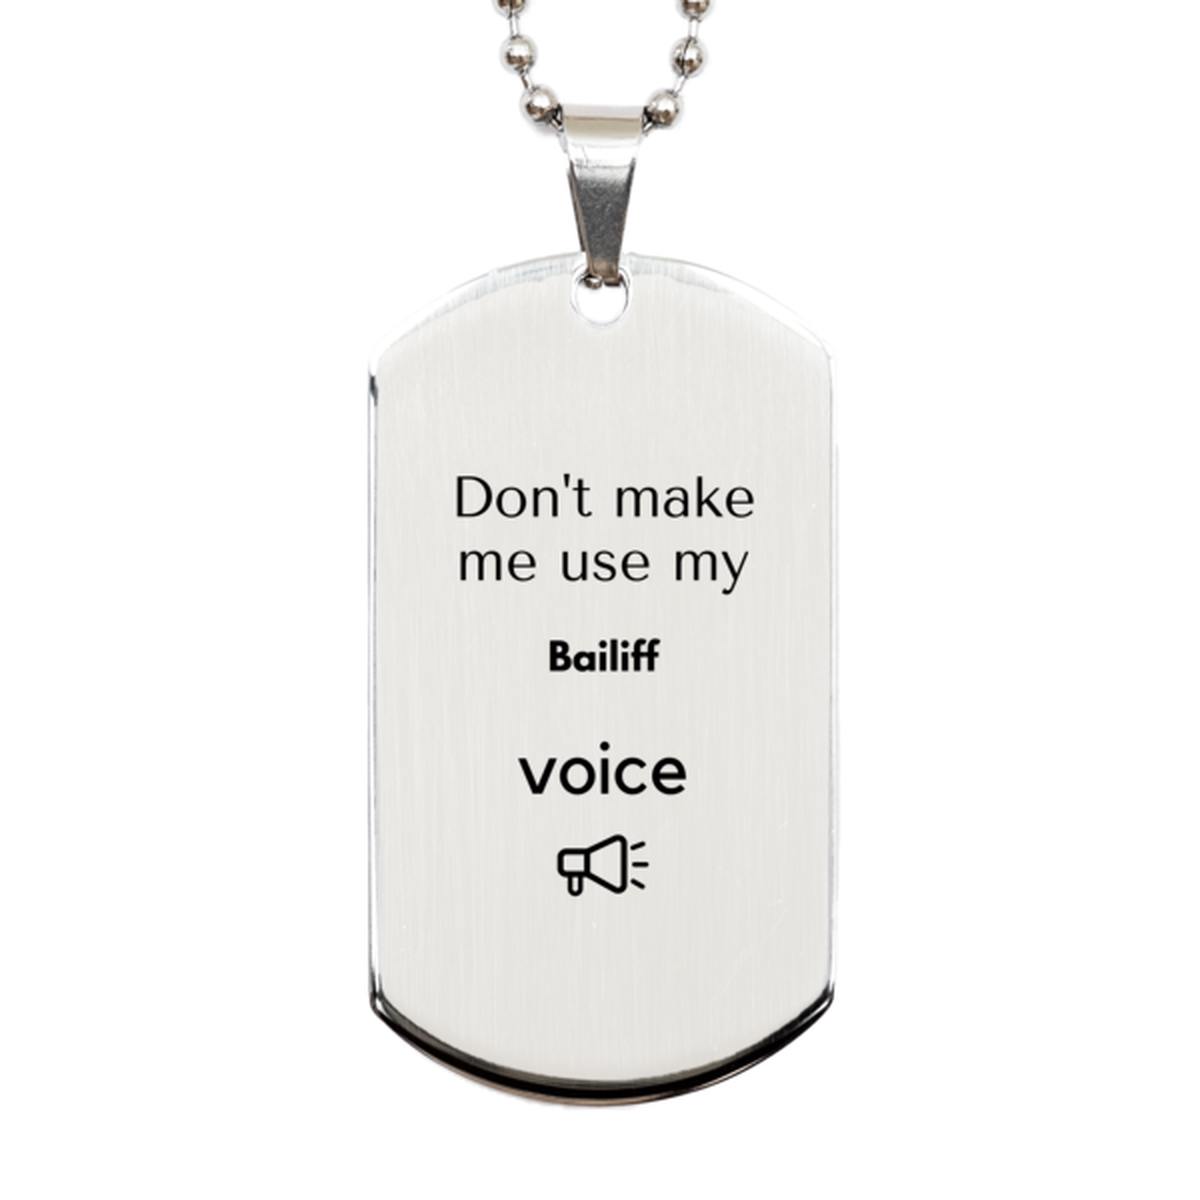 Don't make me use my Bailiff voice, Sarcasm Bailiff Gifts, Christmas Bailiff Silver Dog Tag Birthday Unique Gifts For Bailiff Coworkers, Men, Women, Colleague, Friends